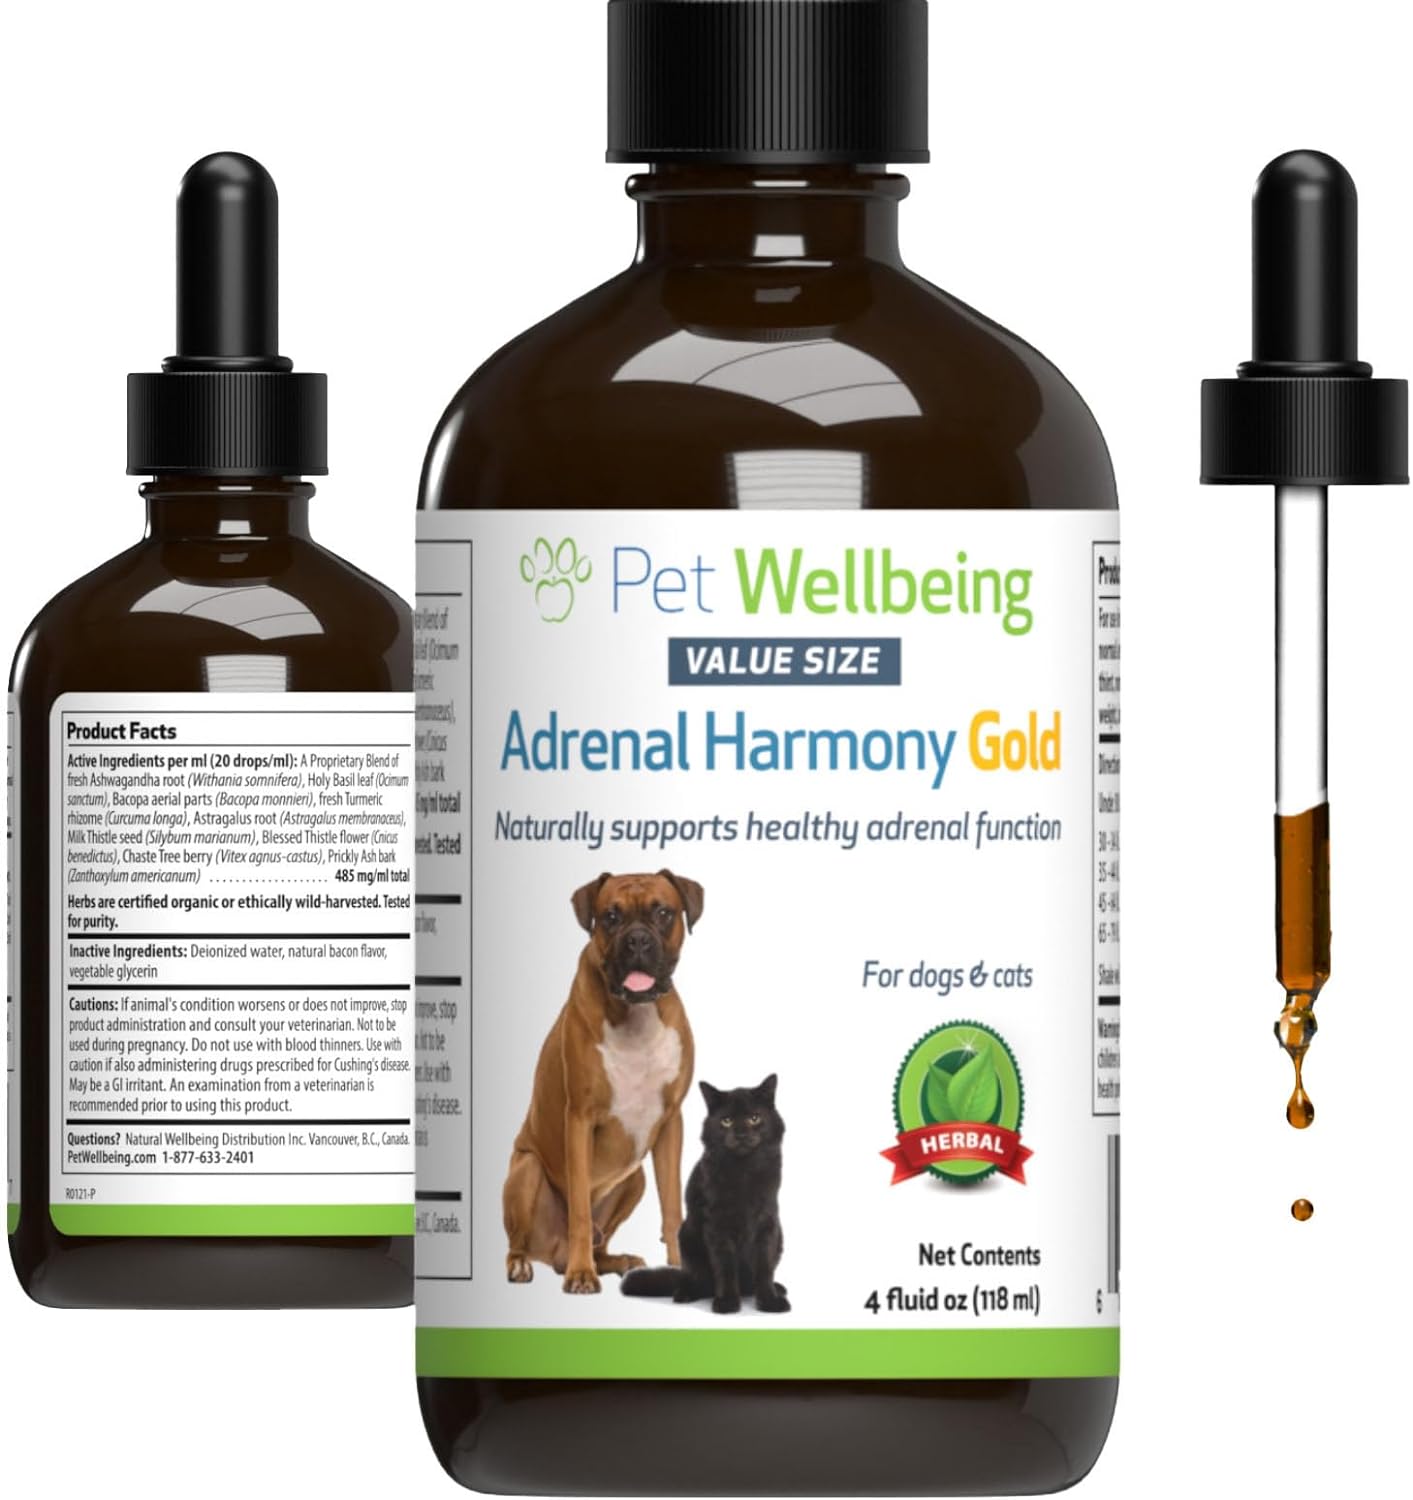 Pet Wellbeing Adrenal Harmony Gold - Veterinarian Formulated - Dog Cushing's, Adrenal Health, Balance Cortisol Levels, Antioxidant Support - Natural Supplement for Dogs 4 fl oz (118 ml)